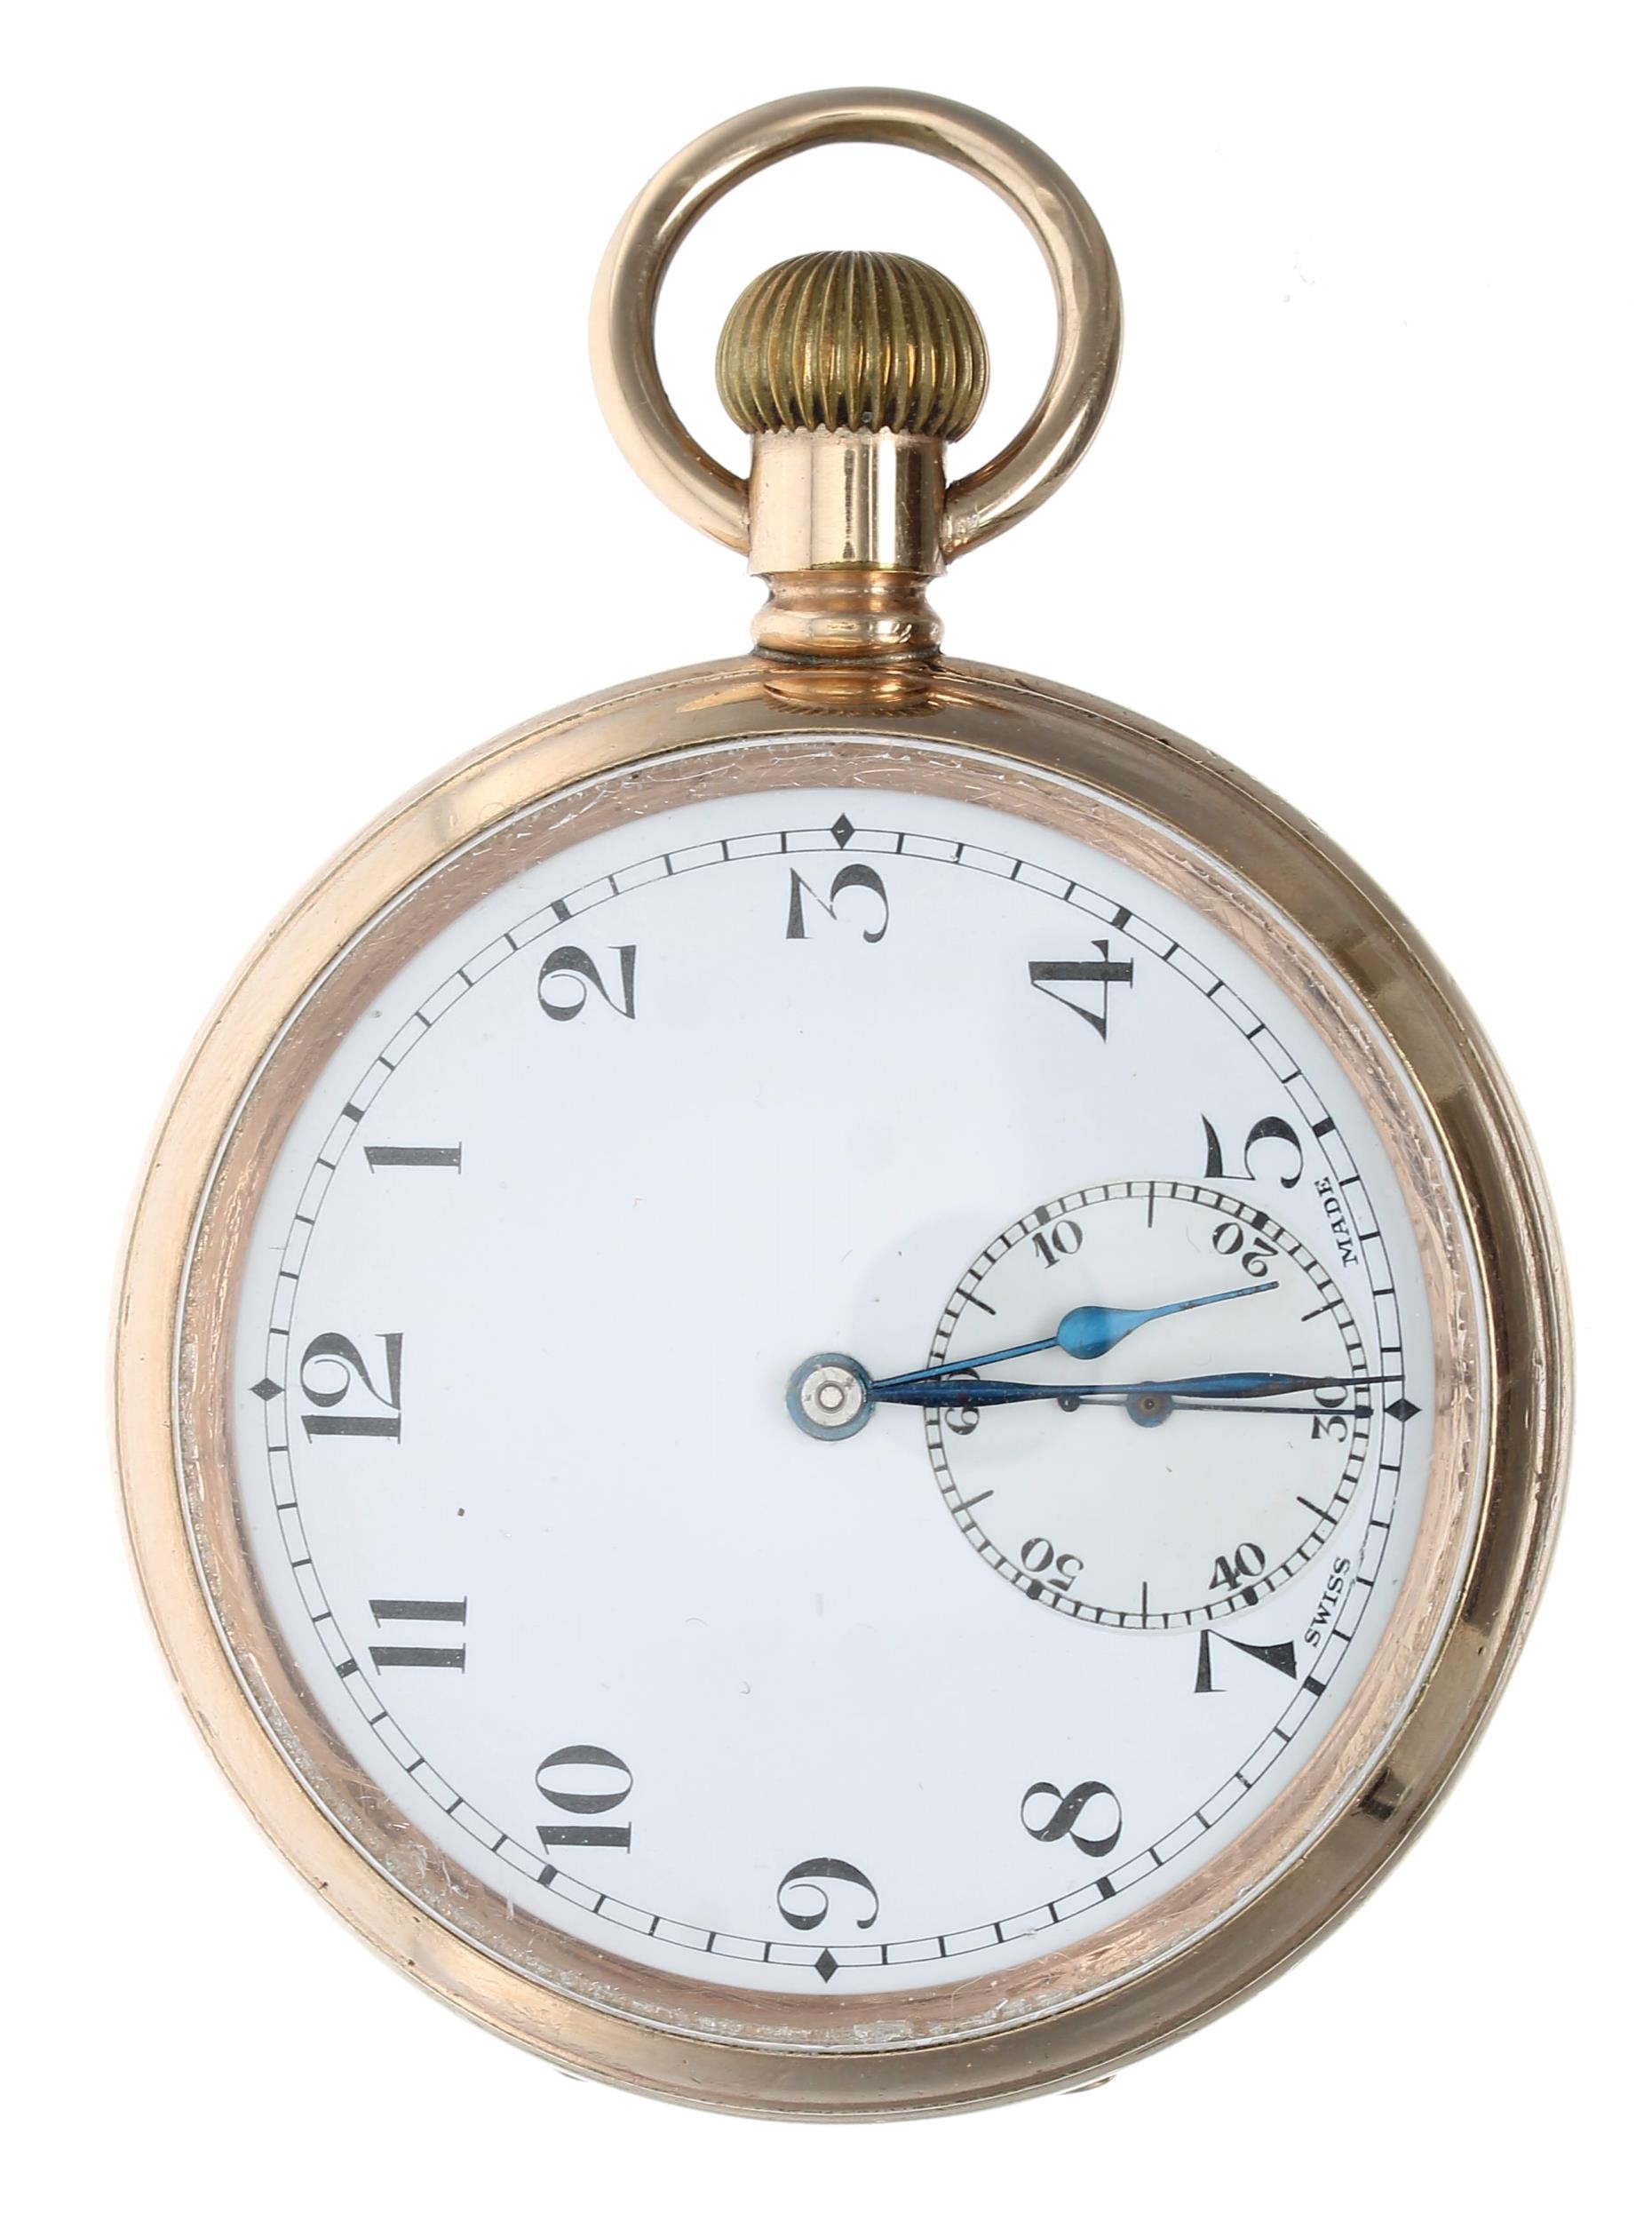 Syren - Swiss gold filled lever pocket watch, signed movement, hinged cuvette, the dial with